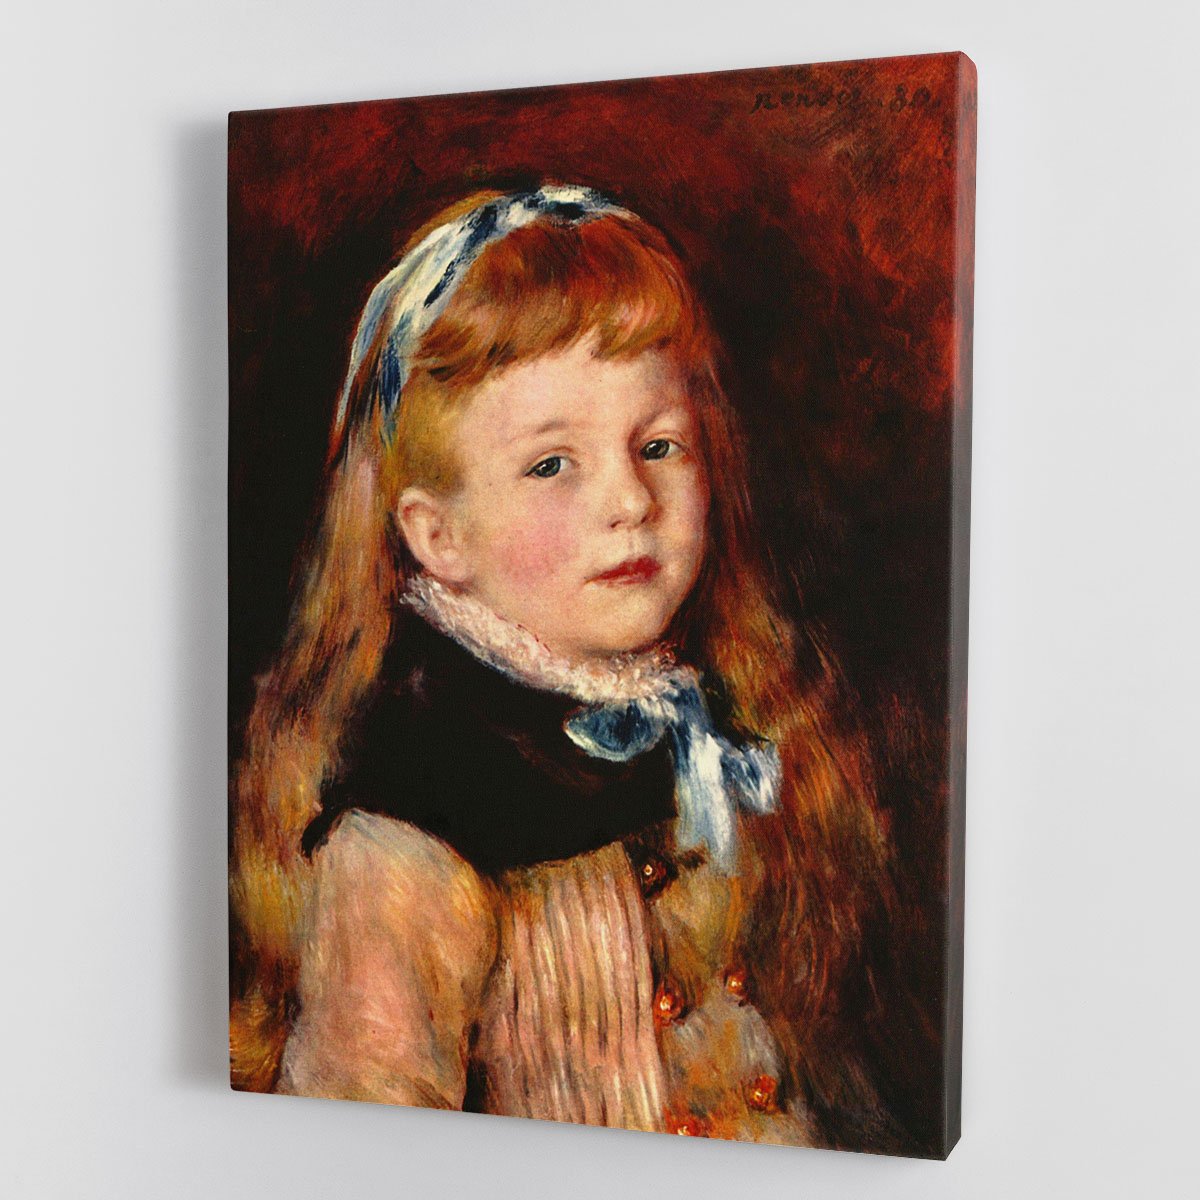 Mademoiselle Grimprel with blue hair band by Renoir Canvas Print or Poster